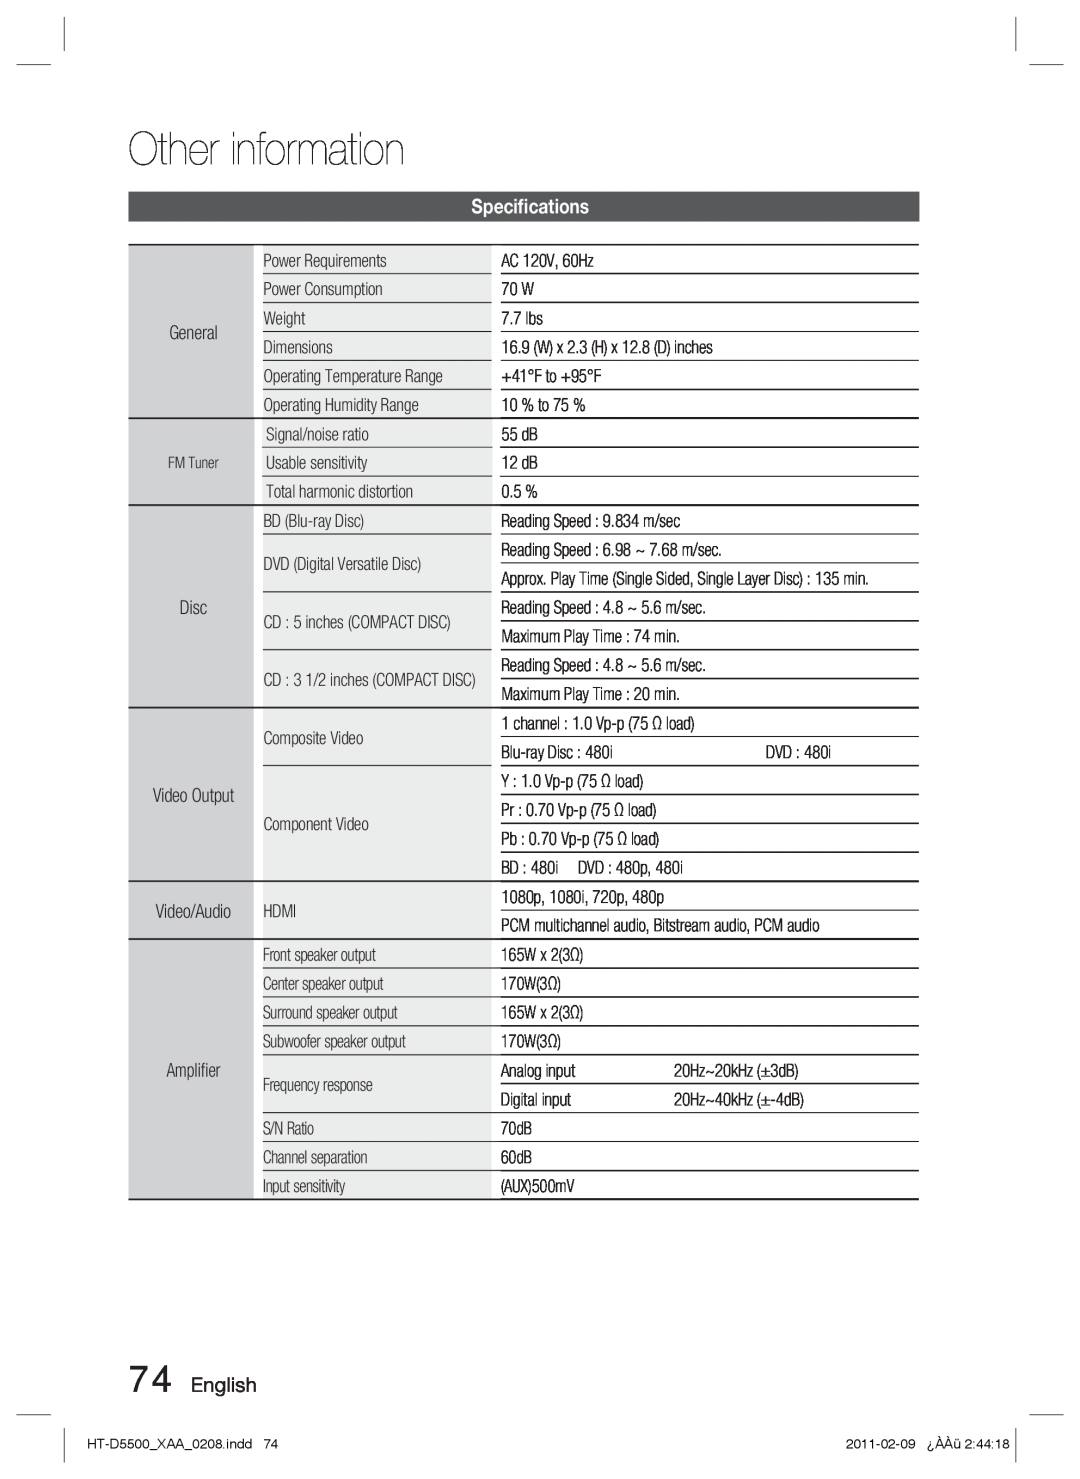 Samsung D5500 user manual Speciﬁcations, Other information, English 